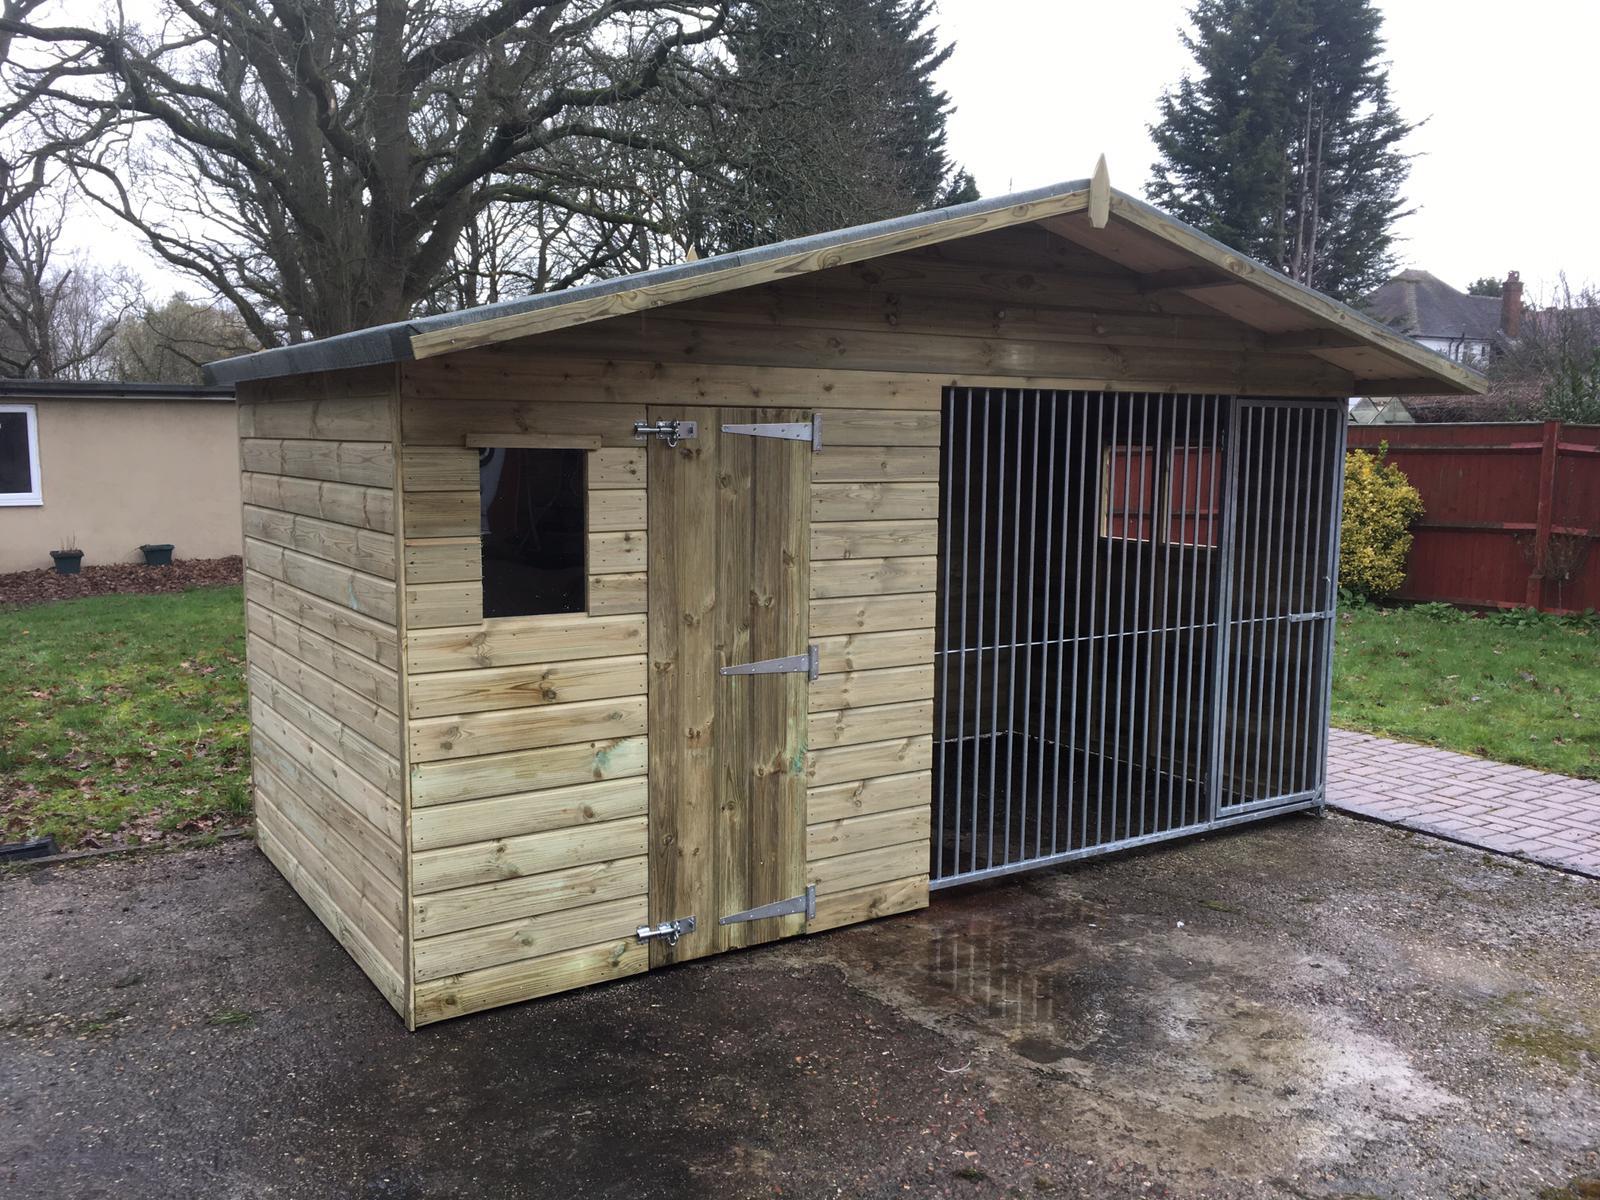 Elworth Chalet Wooden Dog Kennel And Run 10'6ft (wide) x 5ft (depth) x 6'6ft (apex)